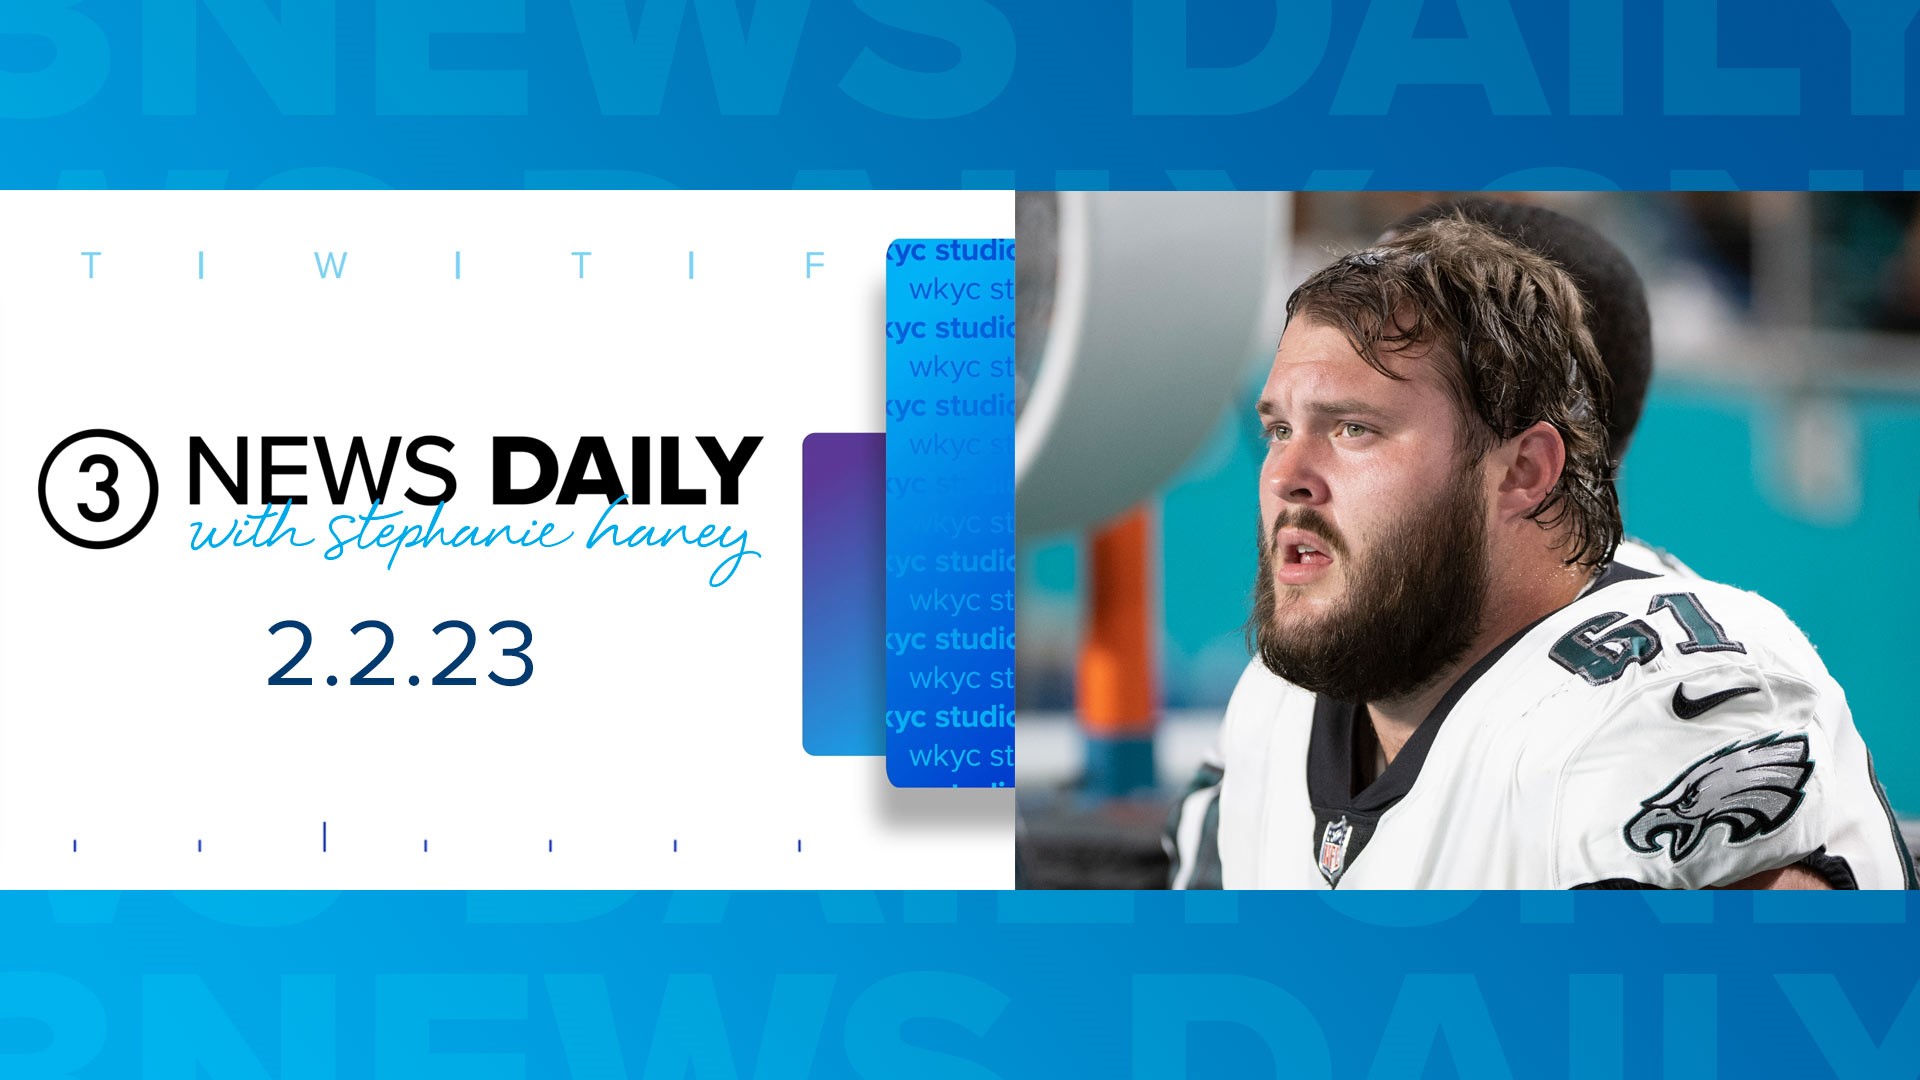 New graphic details about Ohio rape charge against Philadelphia Eagles player Josh Sills on today's 3News Daily with Stephanie Haney.